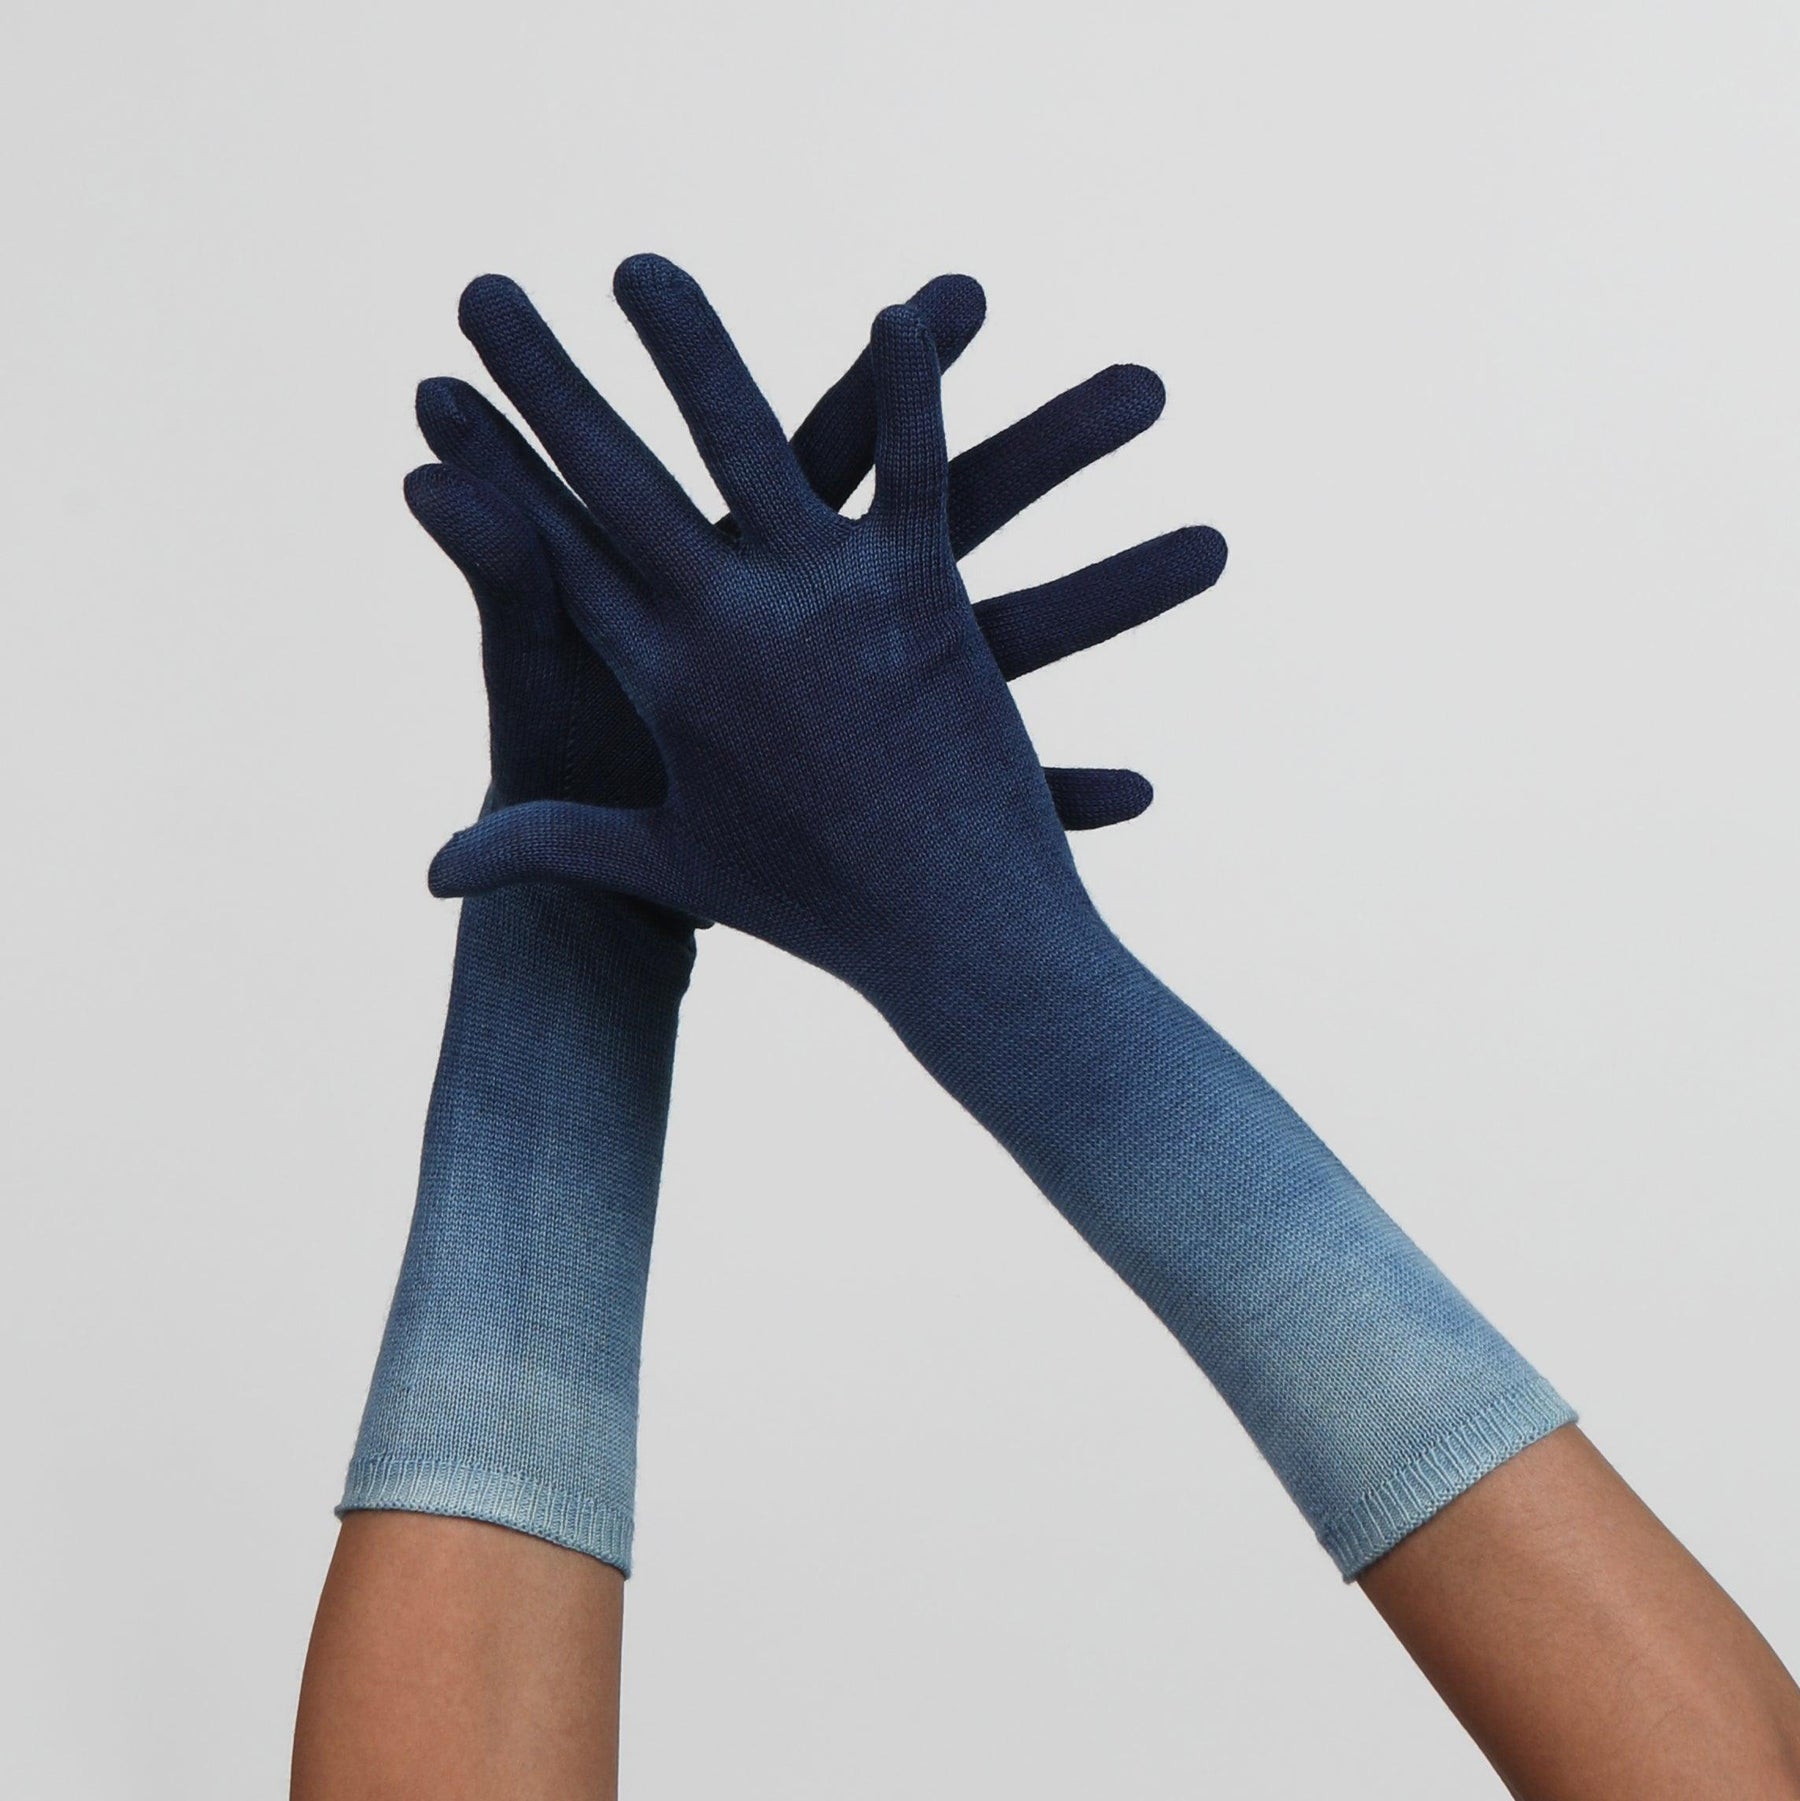 Blue Gloves by Seymoure Gloves.